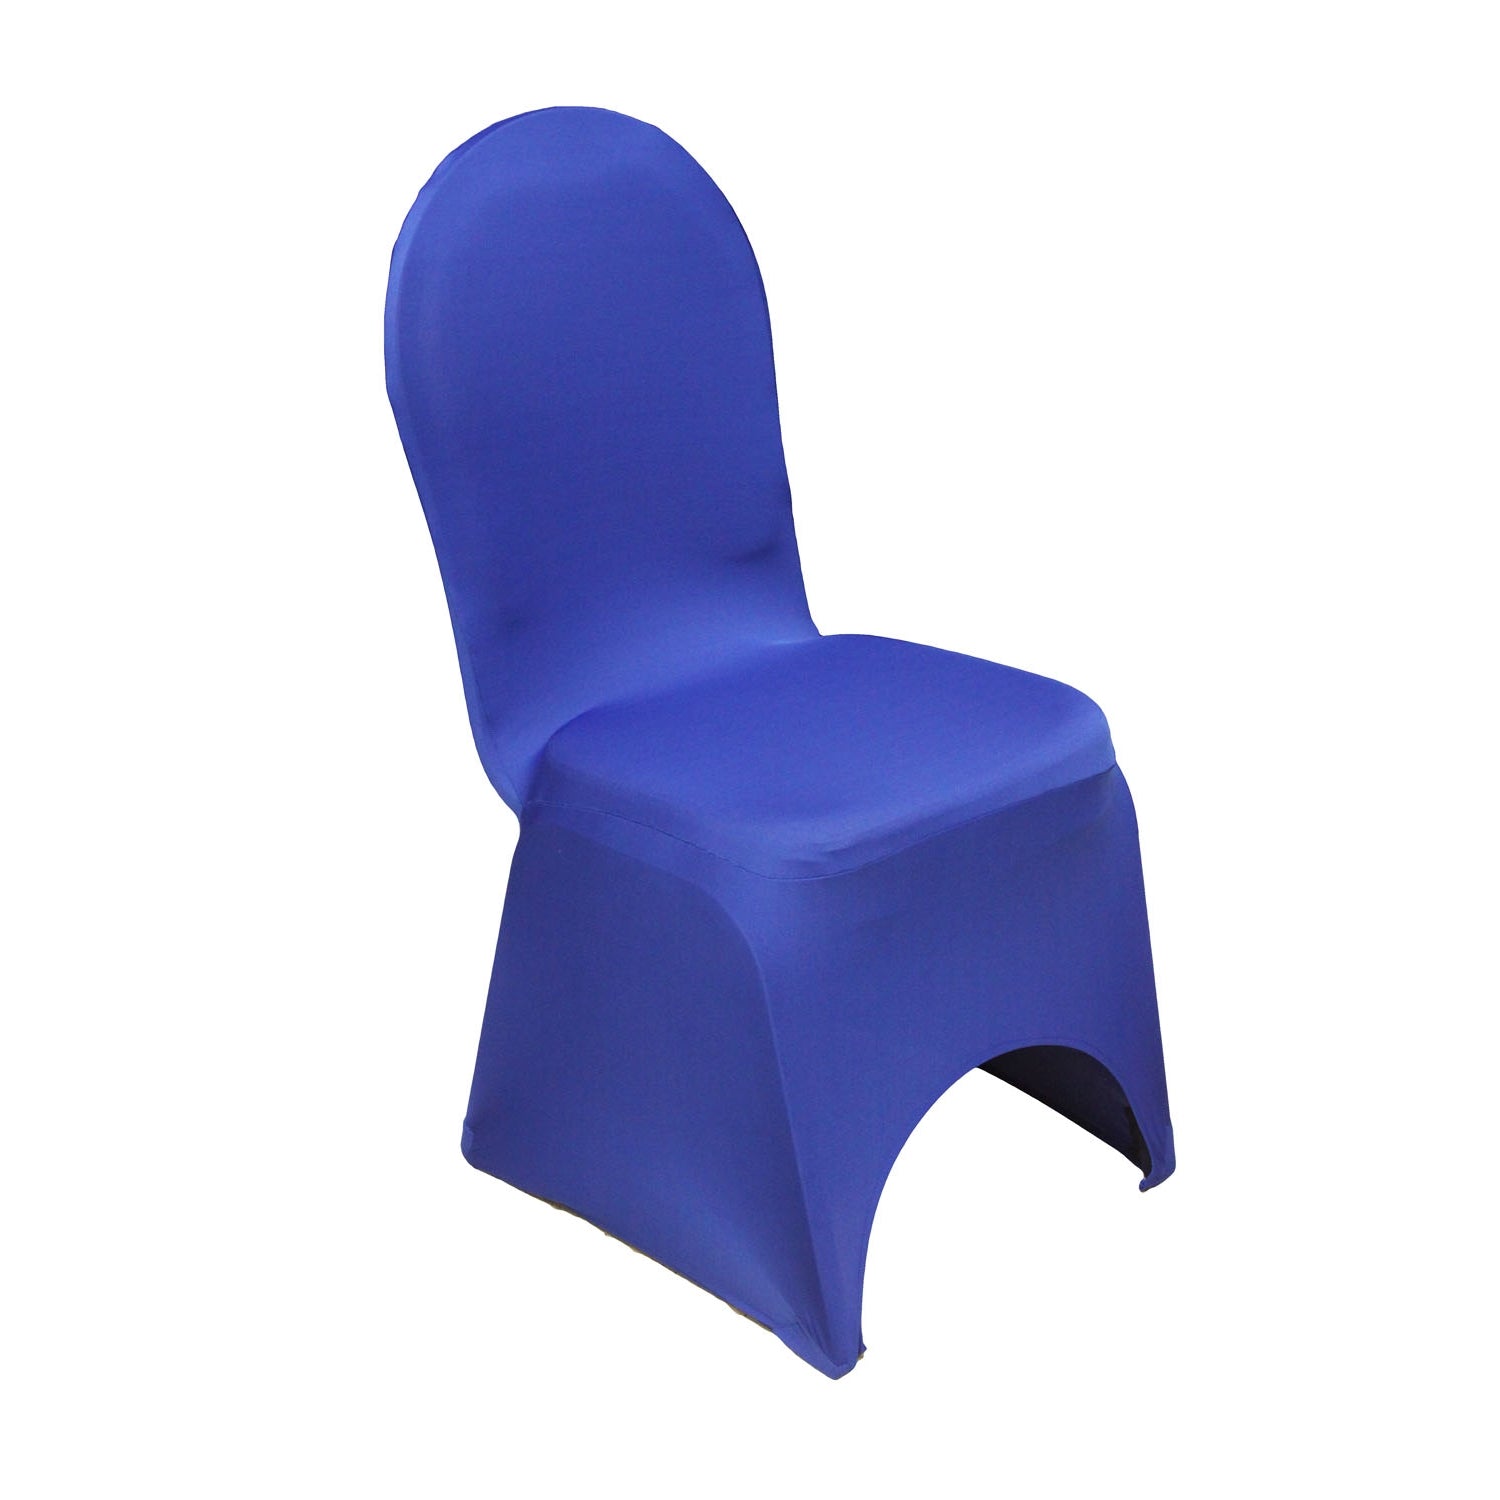 Stretch Spandex Folding Chair Cover Lavender - Your Chair Covers Inc.